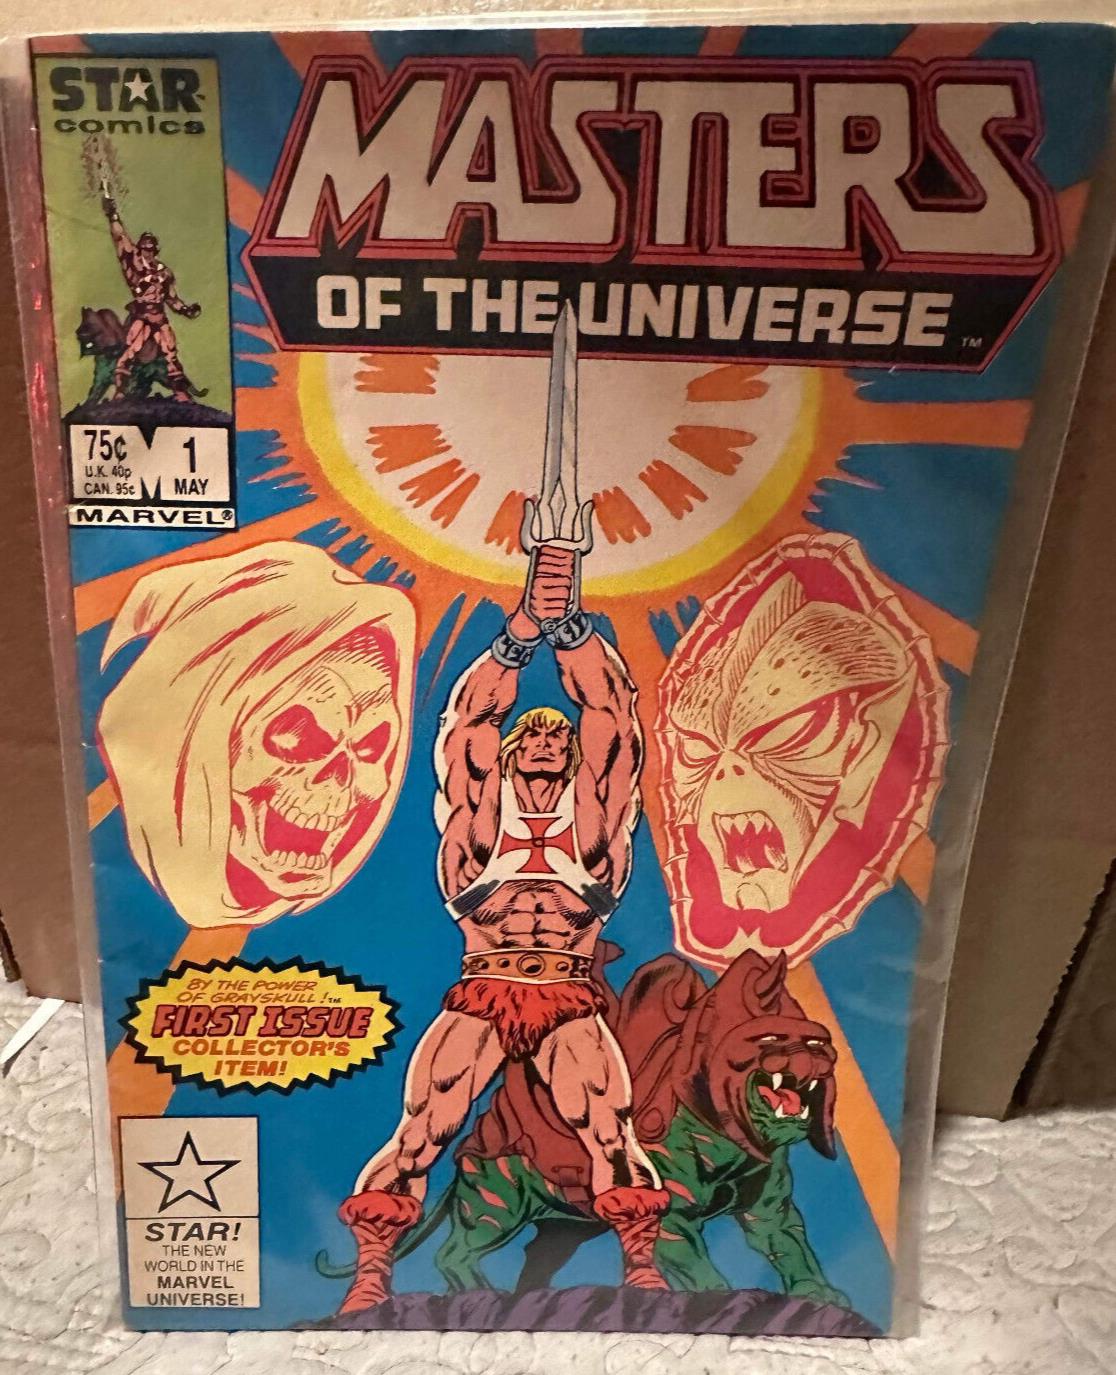 Masters of the Universe #1 May 1986 Marvel Comics Star He-Man